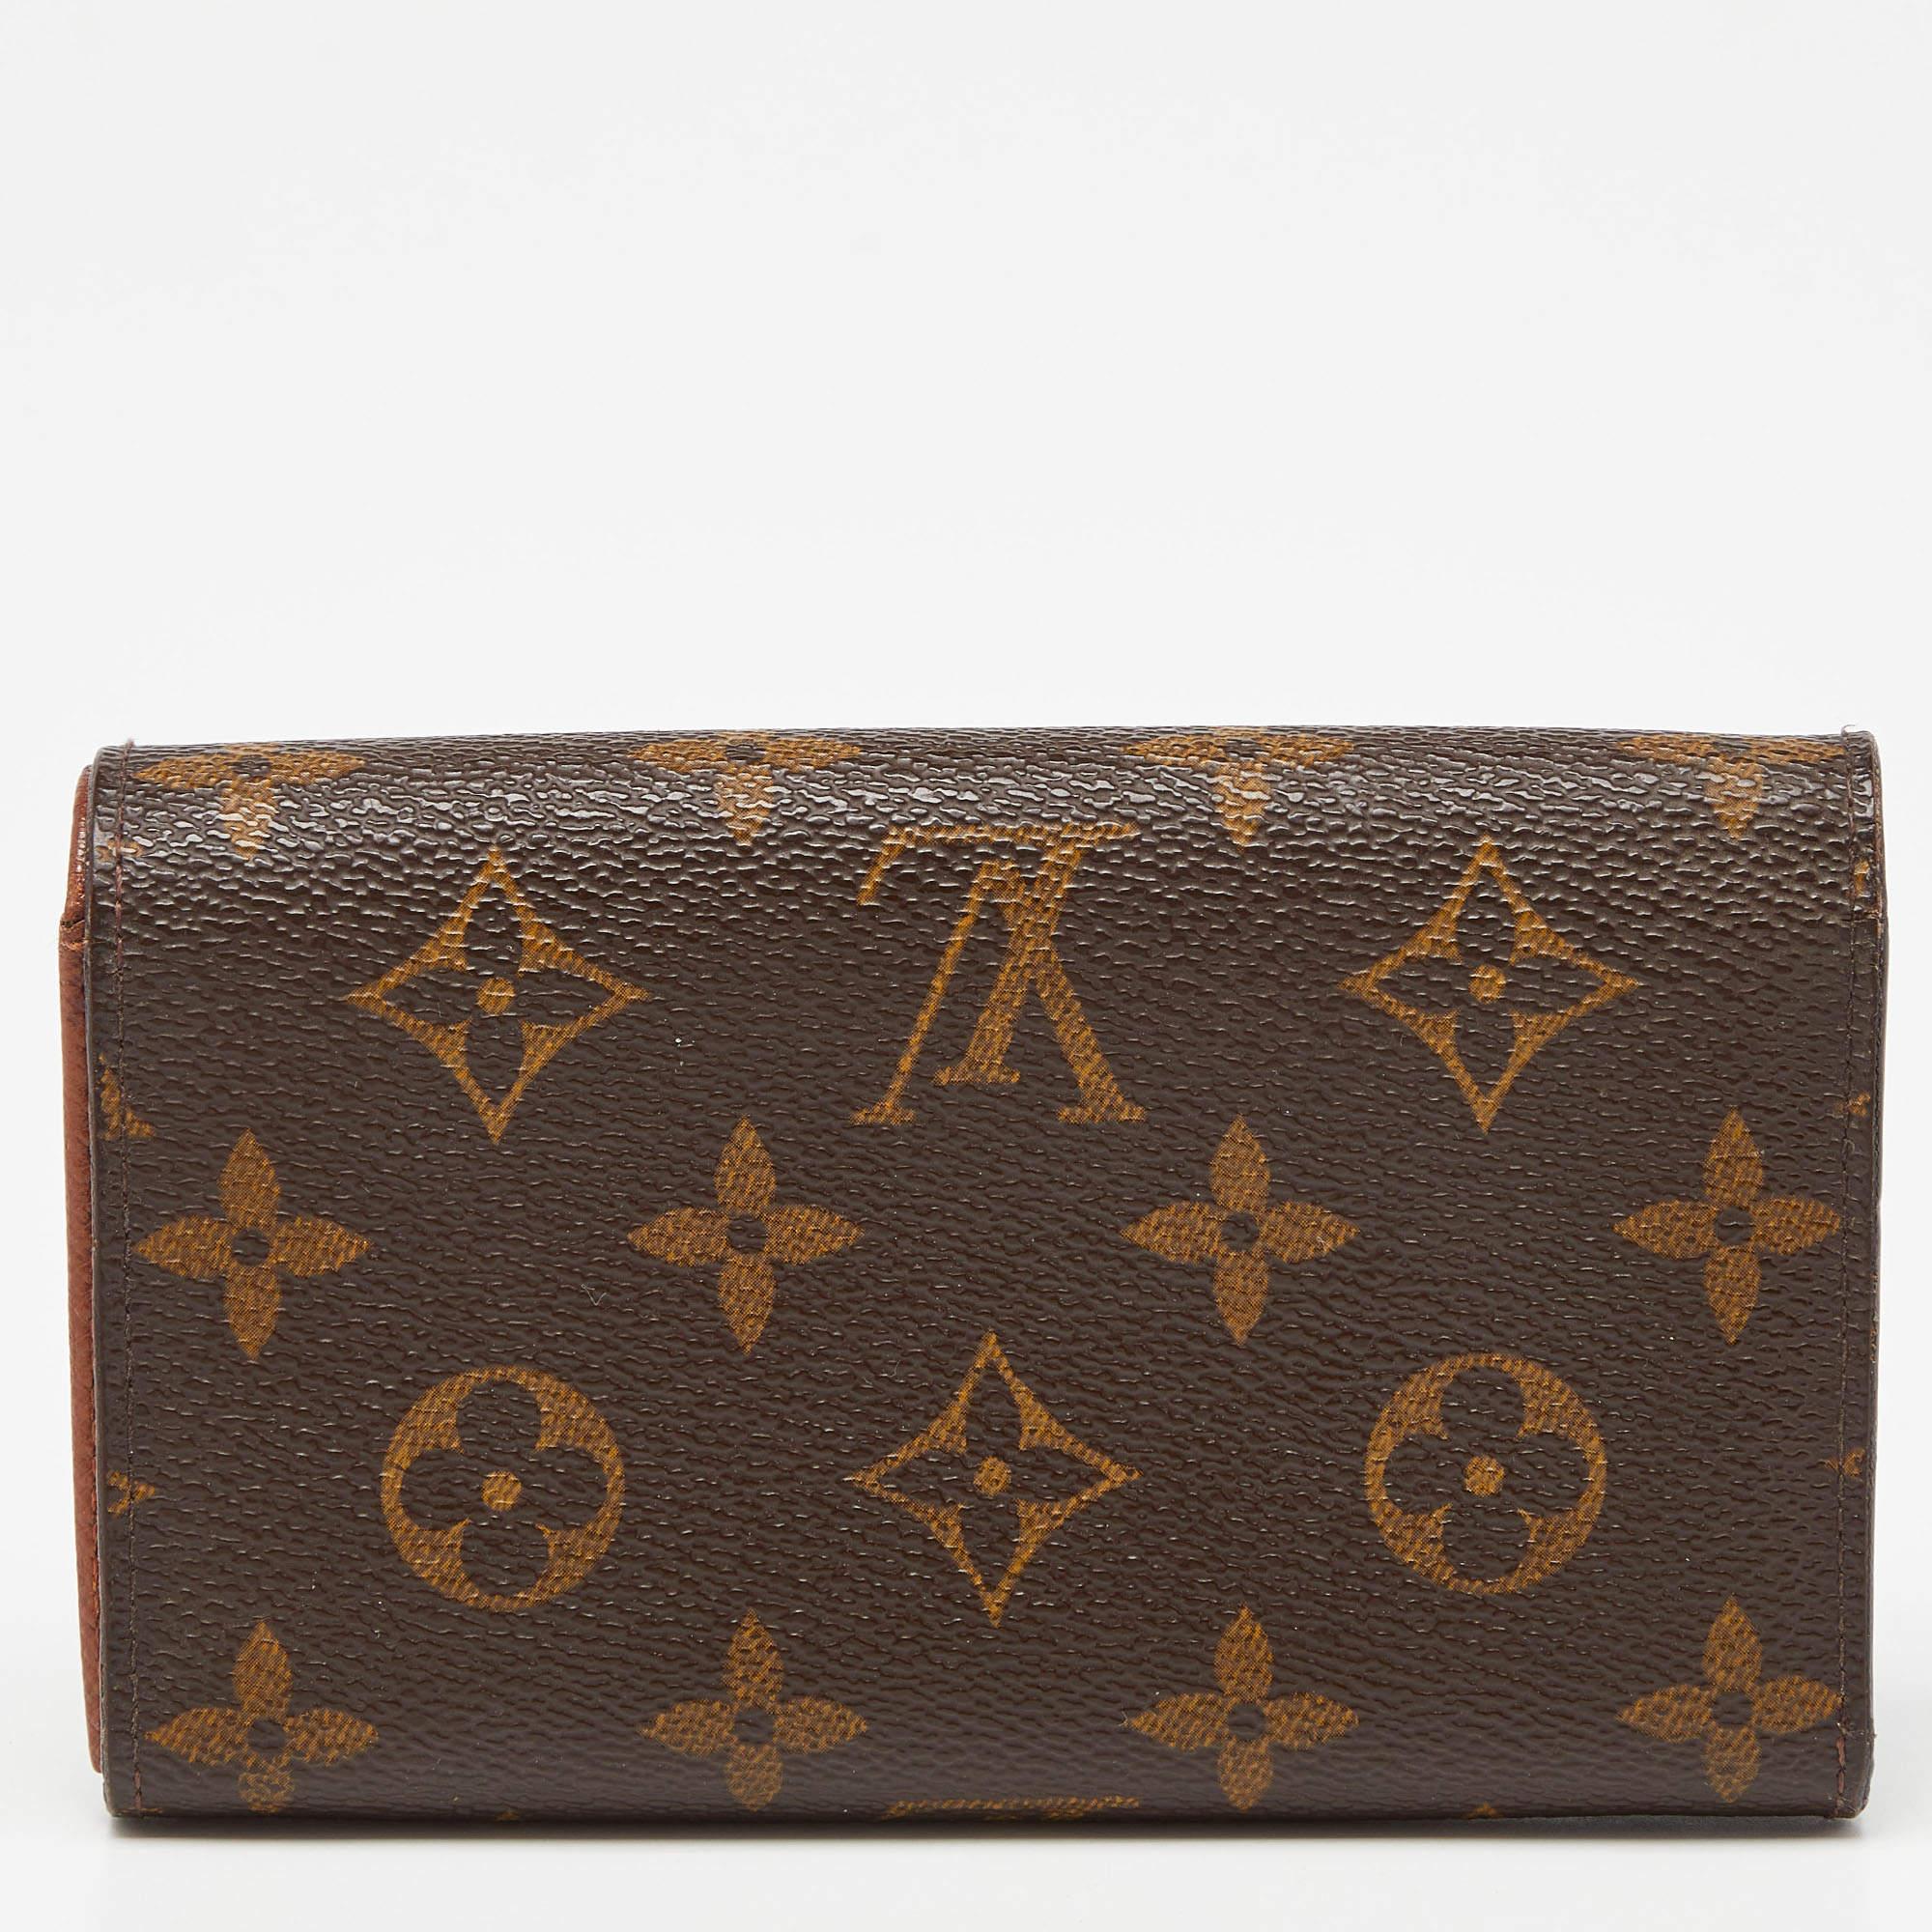 Go for this versatile Louis Vuitton creation and organize your cash and cards with ease. Designed for everyday use, it is crafted from classic Monogram canvas and features a flap design that opens to an interior equipped with multiple